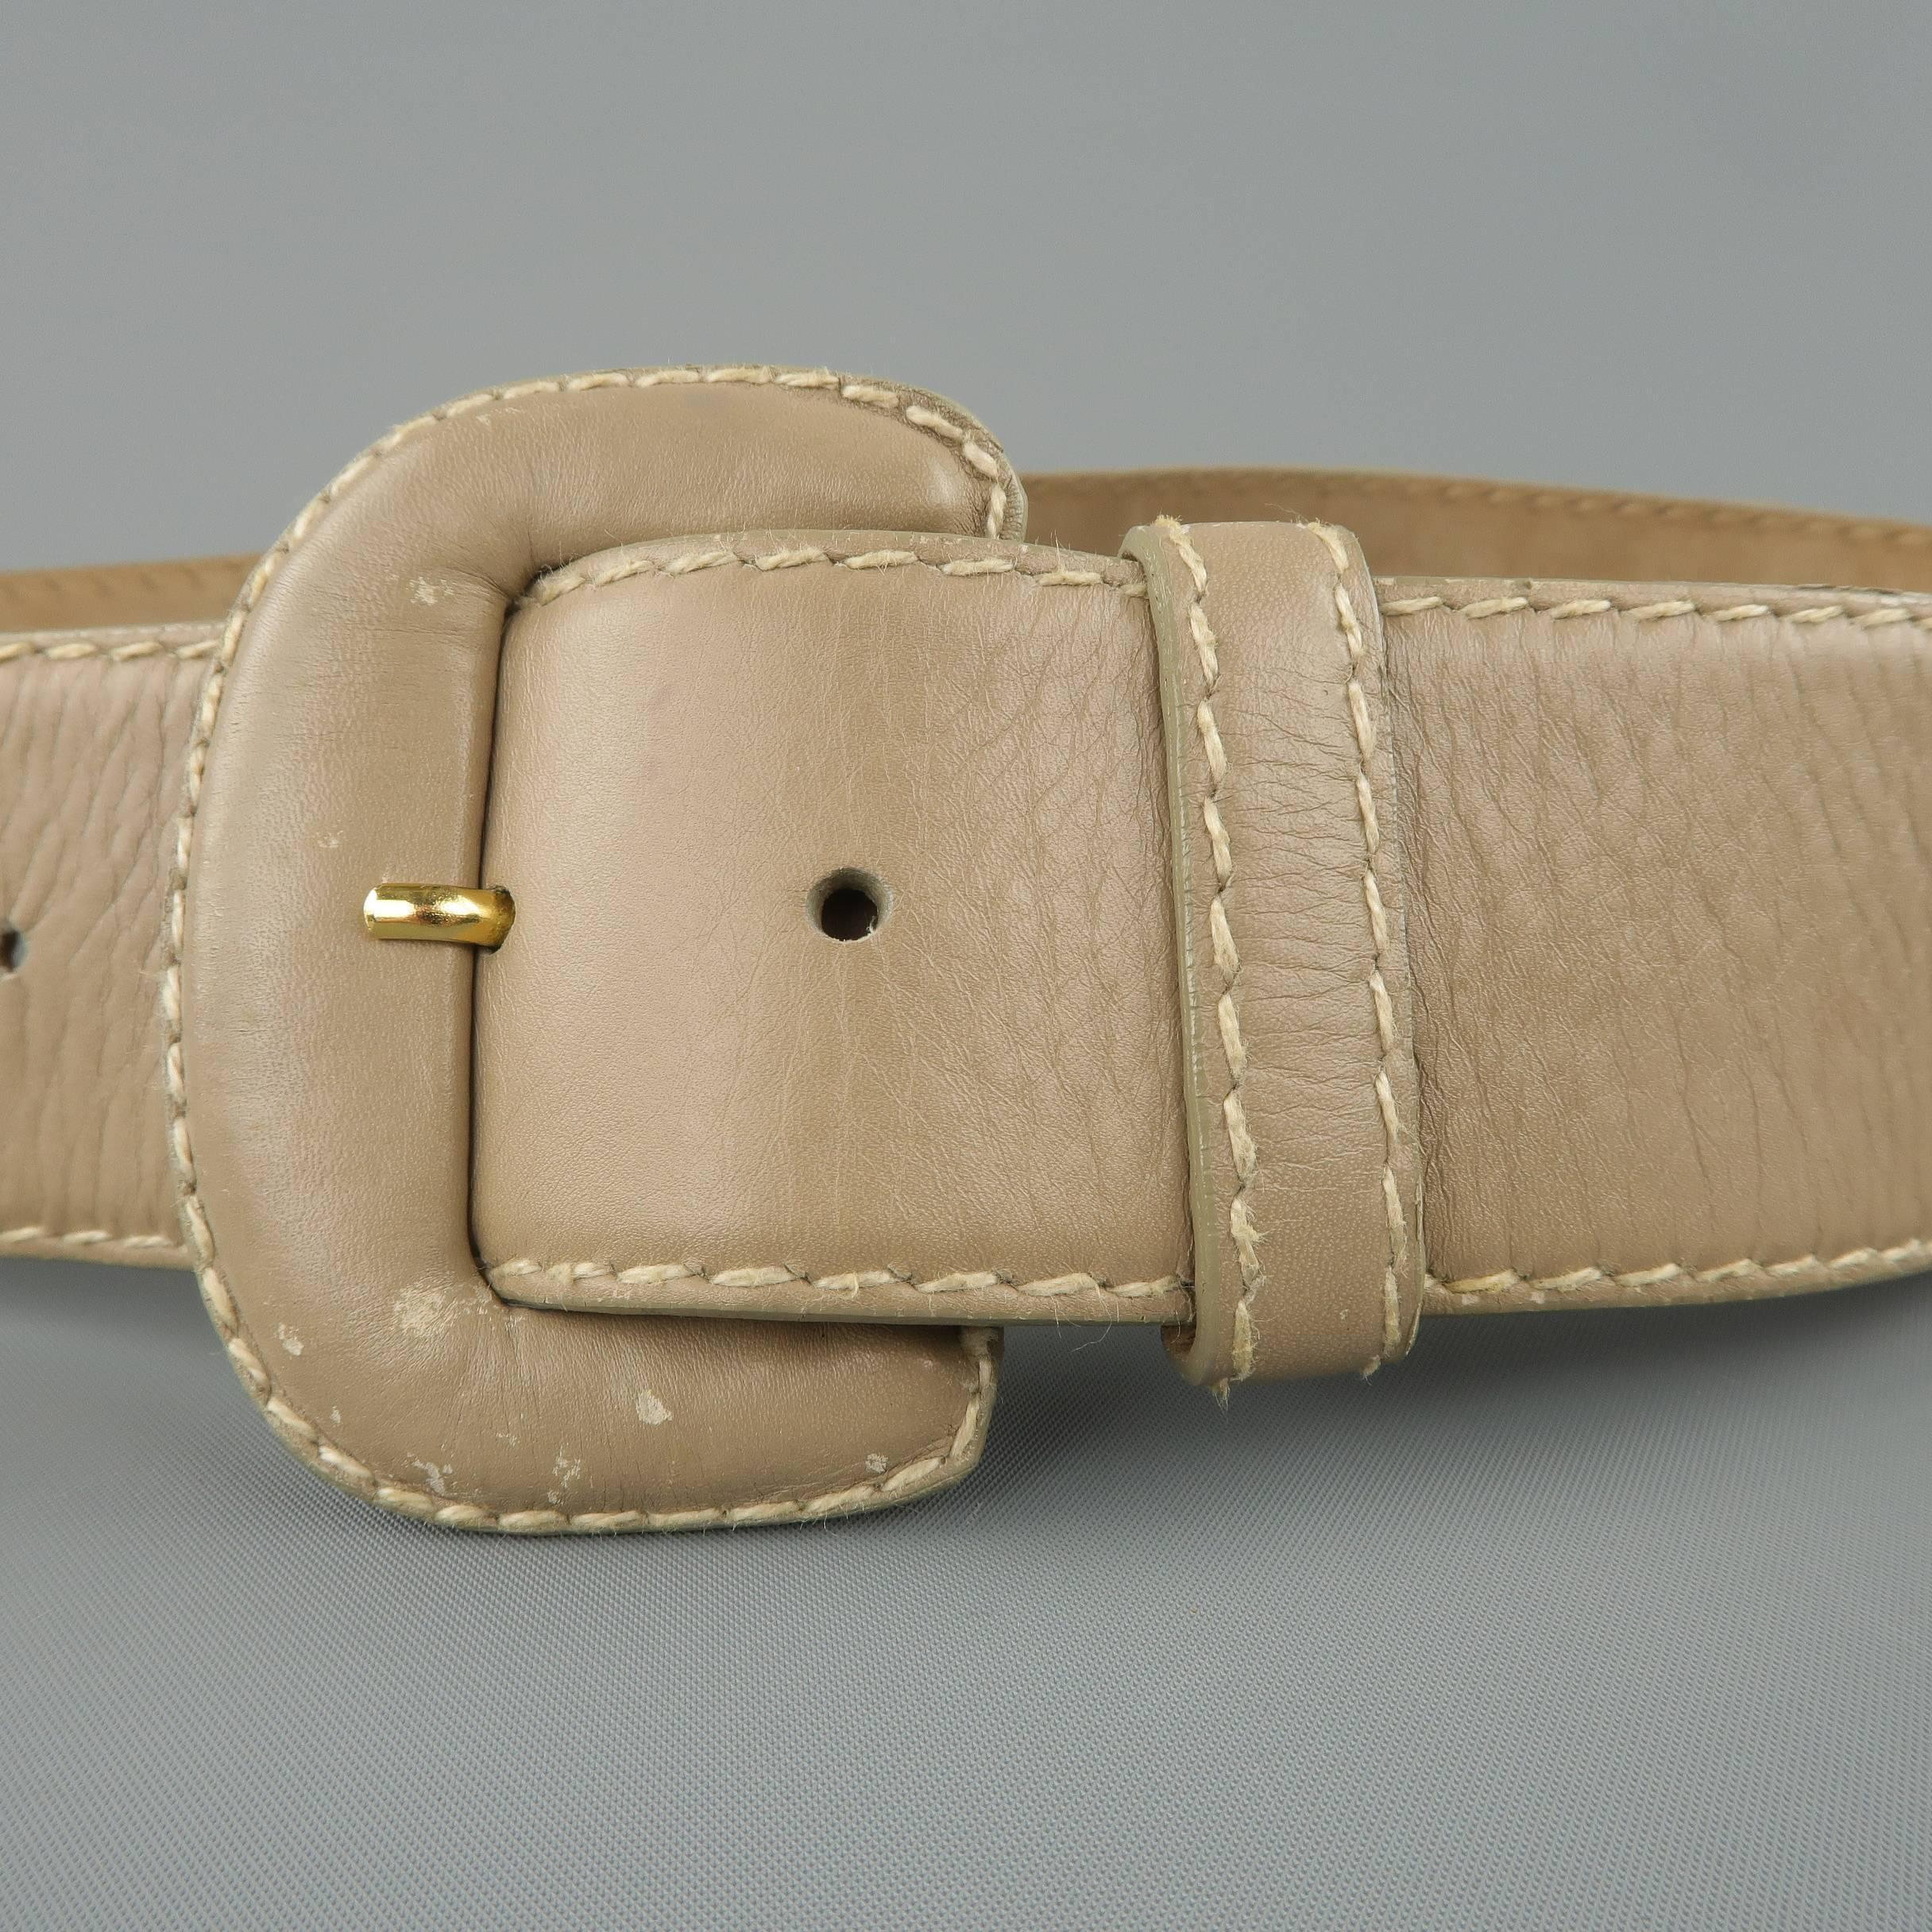 Vintage DONNA KARAN waist belt comes in light taupe gray leather with contrast stitching and a covered buckle. Wear throughout. As-is. Made in Italy.
 
Fair Pre-Owned Condition.
Marked: Medium
 
Length: 38 in.
Width: 2 in.
Fits: 27-32 in.
